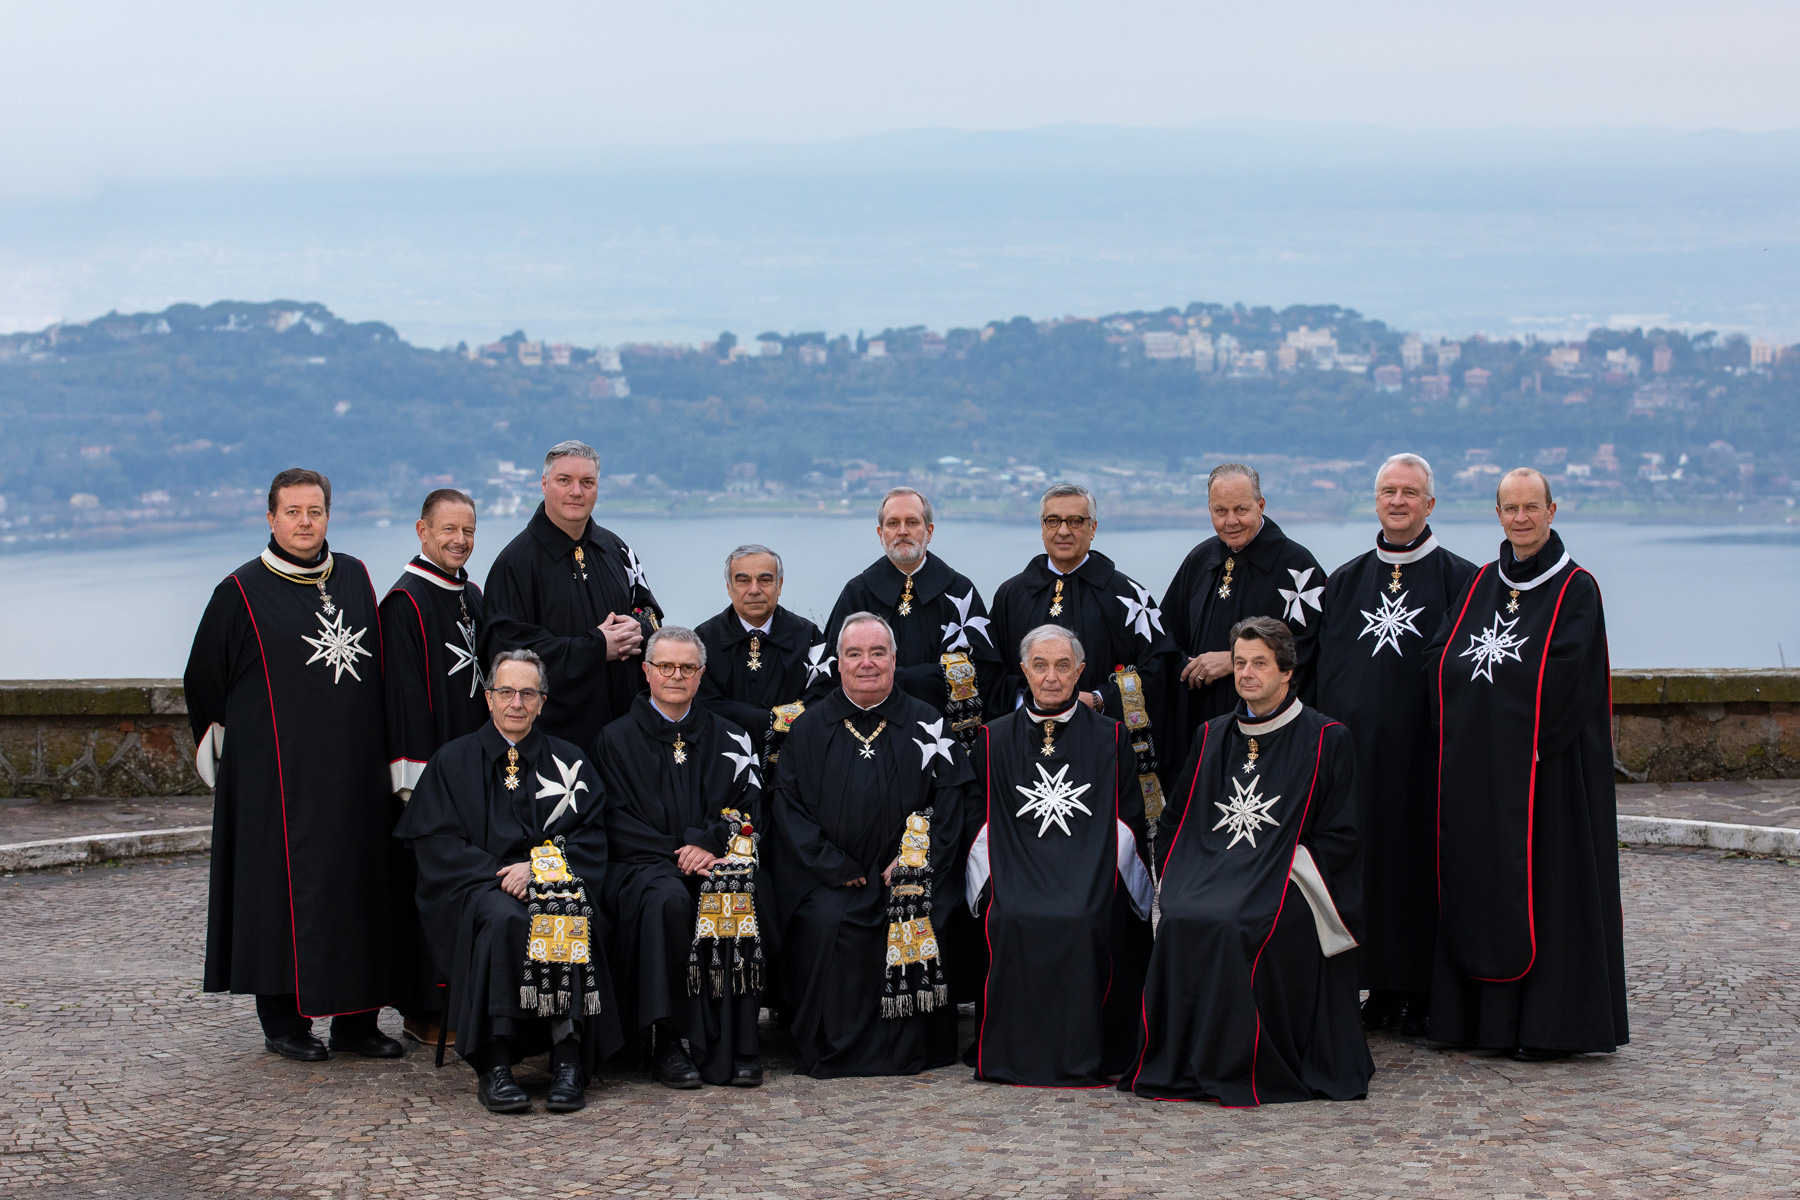 THE EXTRAORDINARY CHAPTER GENERAL ELECTED THE SOVEREIGN COUNCIL